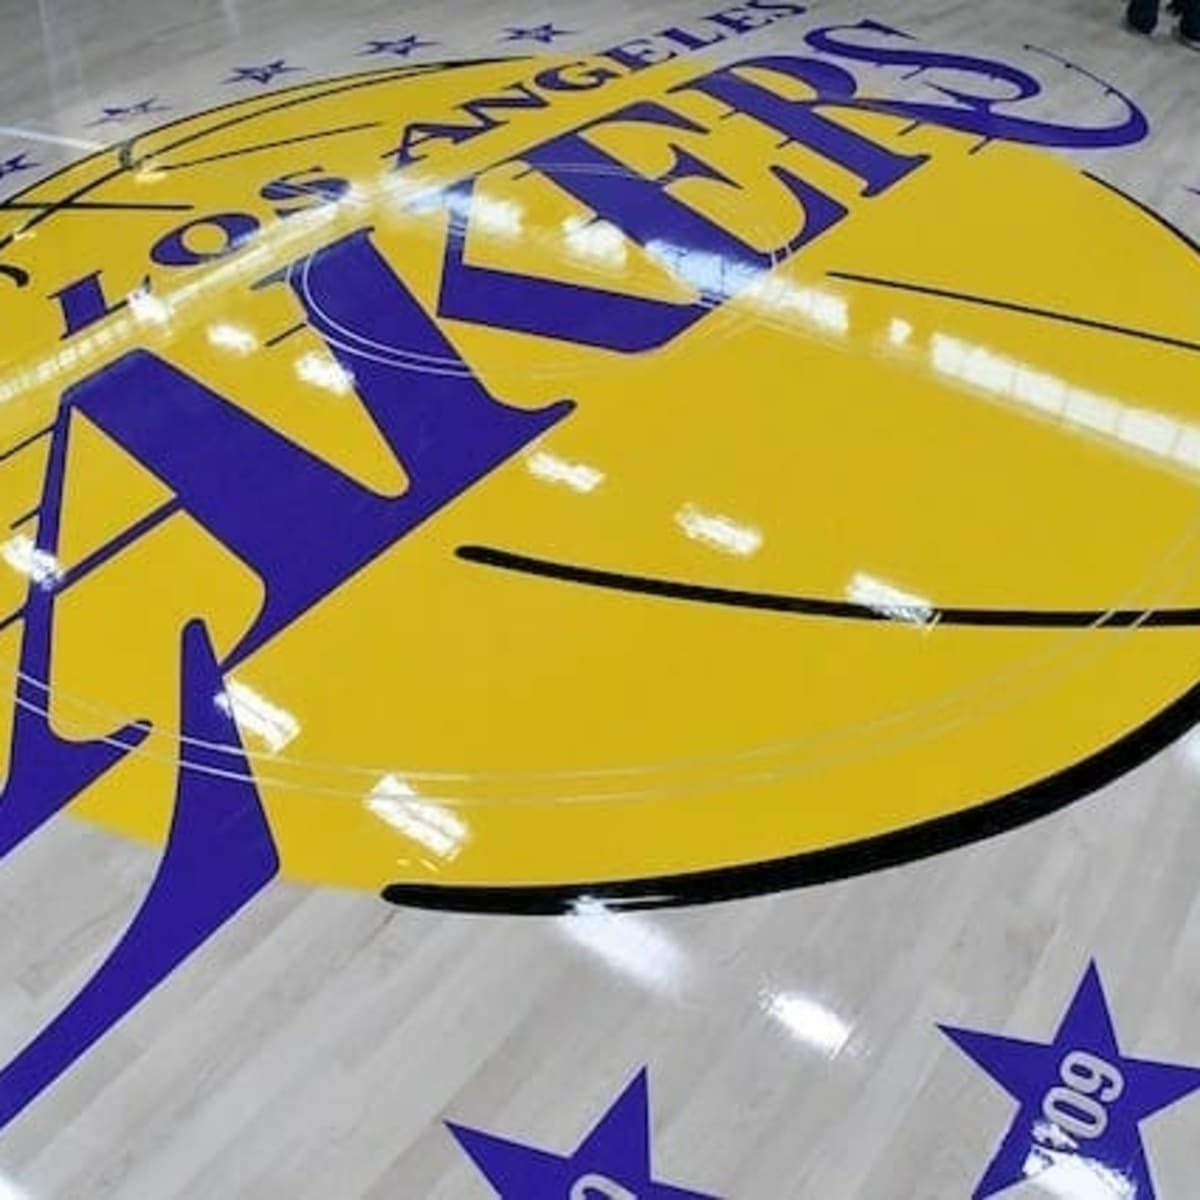 Lakers unveiled Showtime-inspired new uniforms